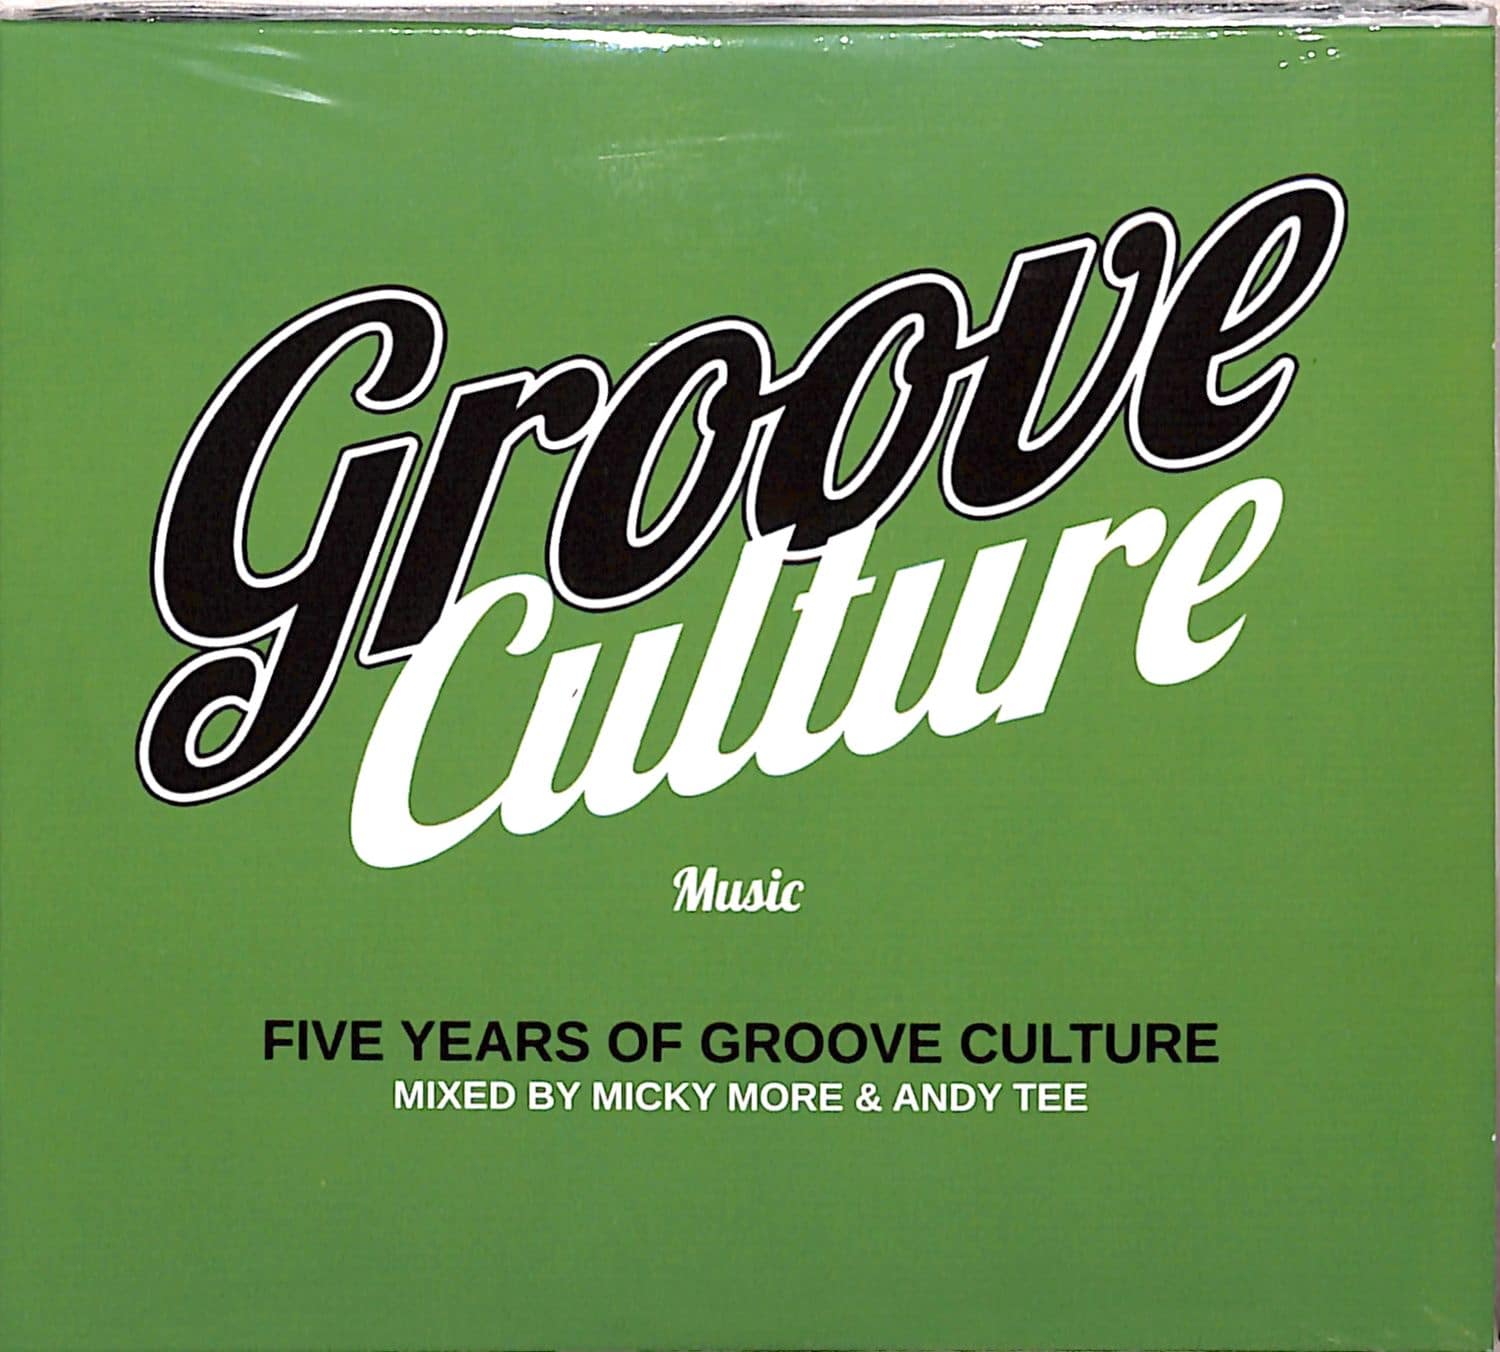 Micky More & Andy Tee - FIVE YEARS OF GROOVE CULTURE MUSIC 